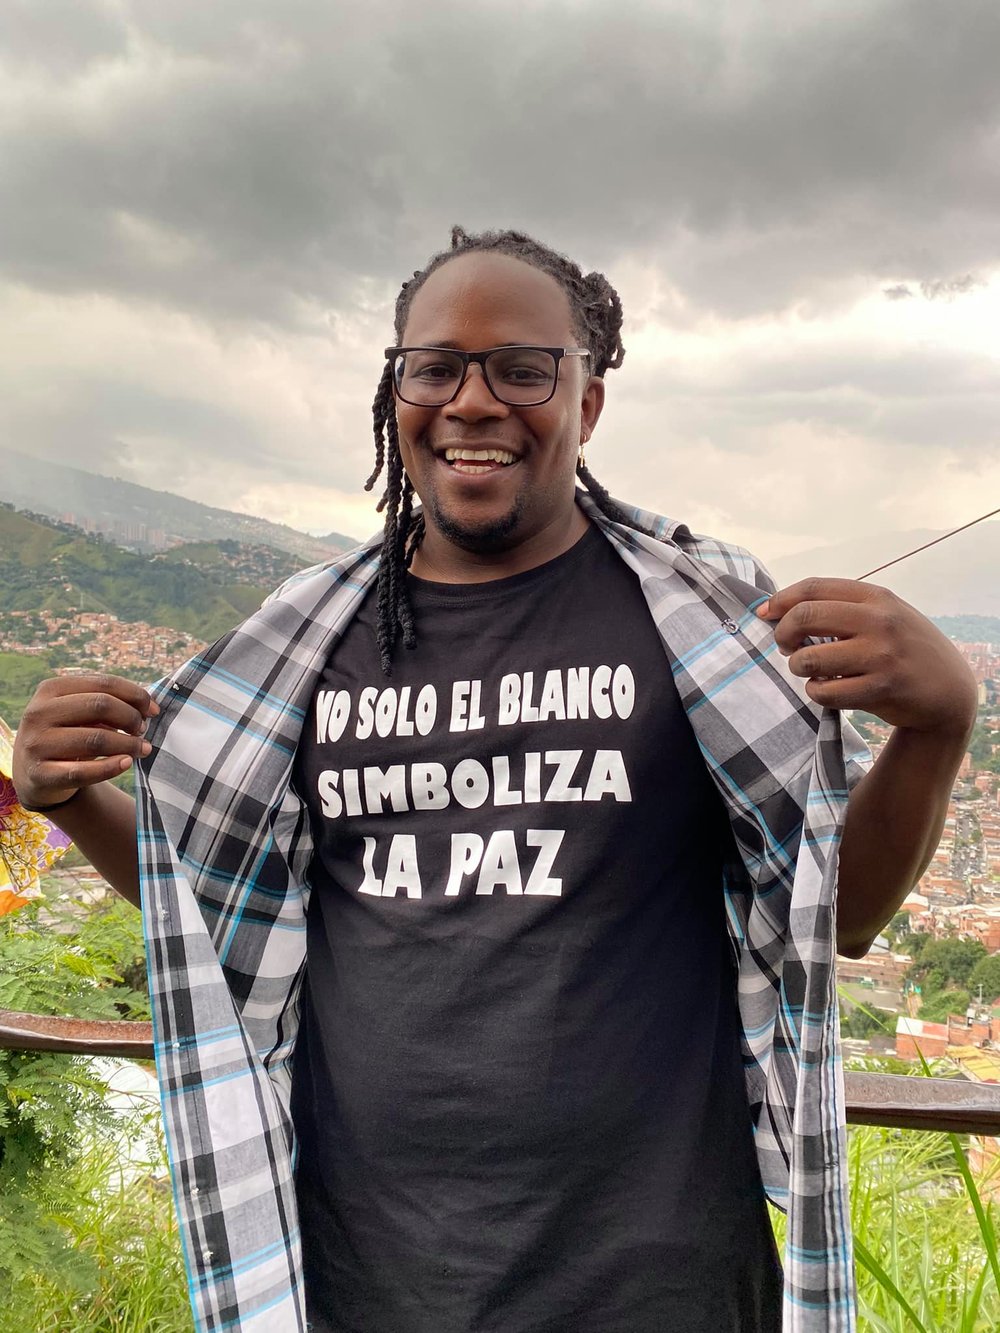  When Fredy Asprilla was a youth living in Comuna 13, he was surrounded by violence and drugs. But someone gave him a cassette of music which opened up his world. It was hip-hop music, and through it he learned that there were Black youth in the Unit